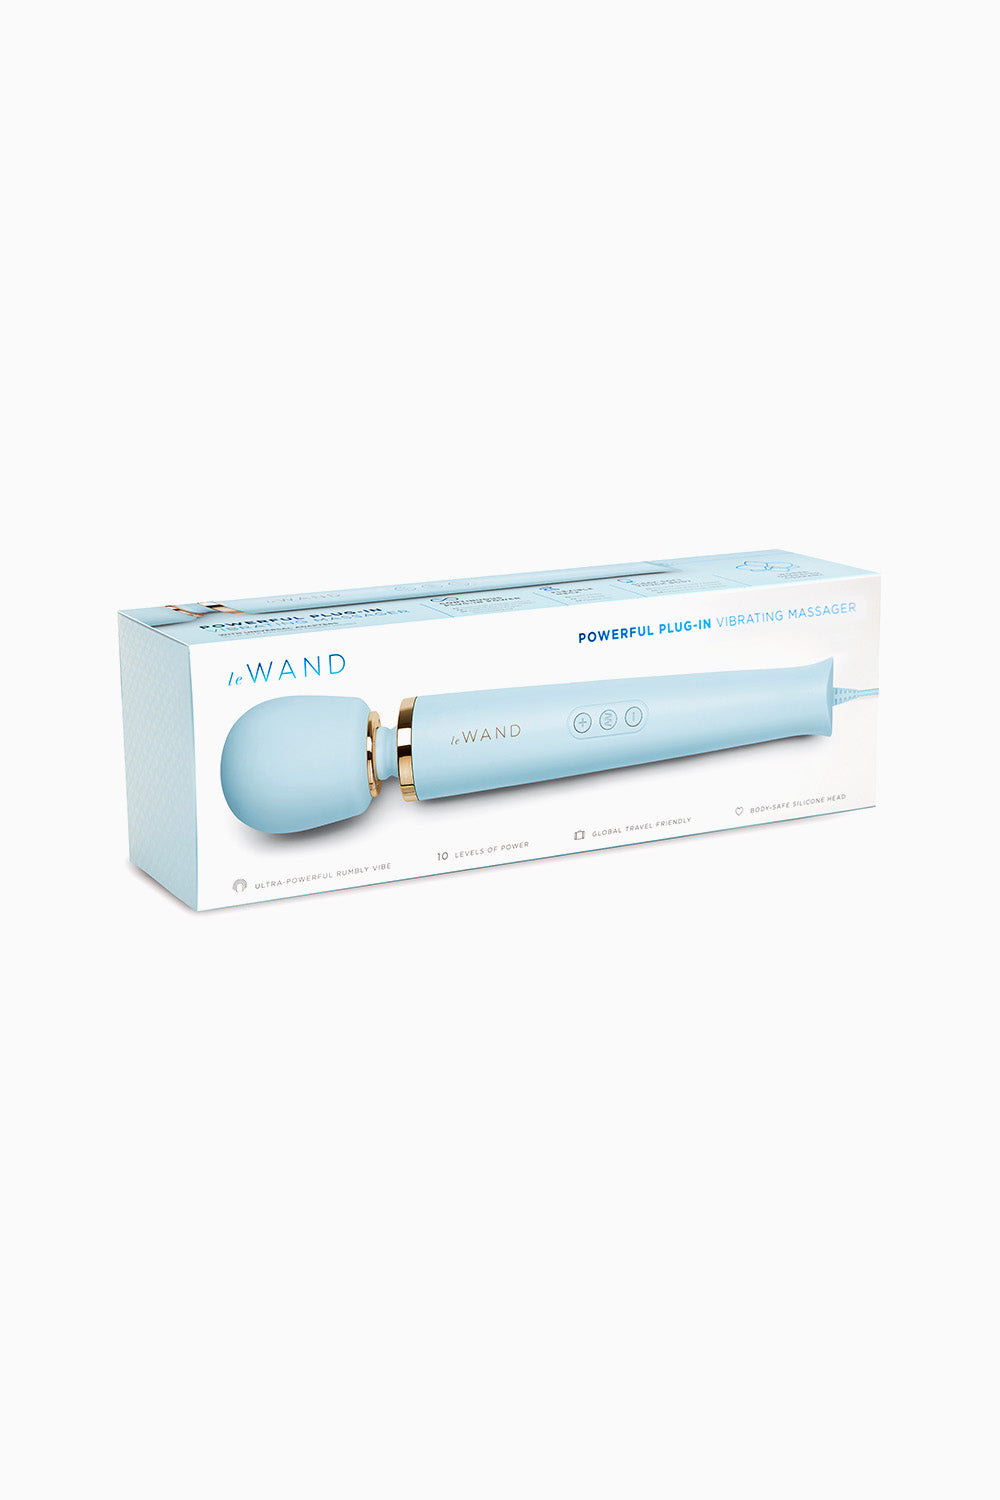 Le Wand Powerful Plug-In Vibrating Massager Sky Blue, 13 Inches